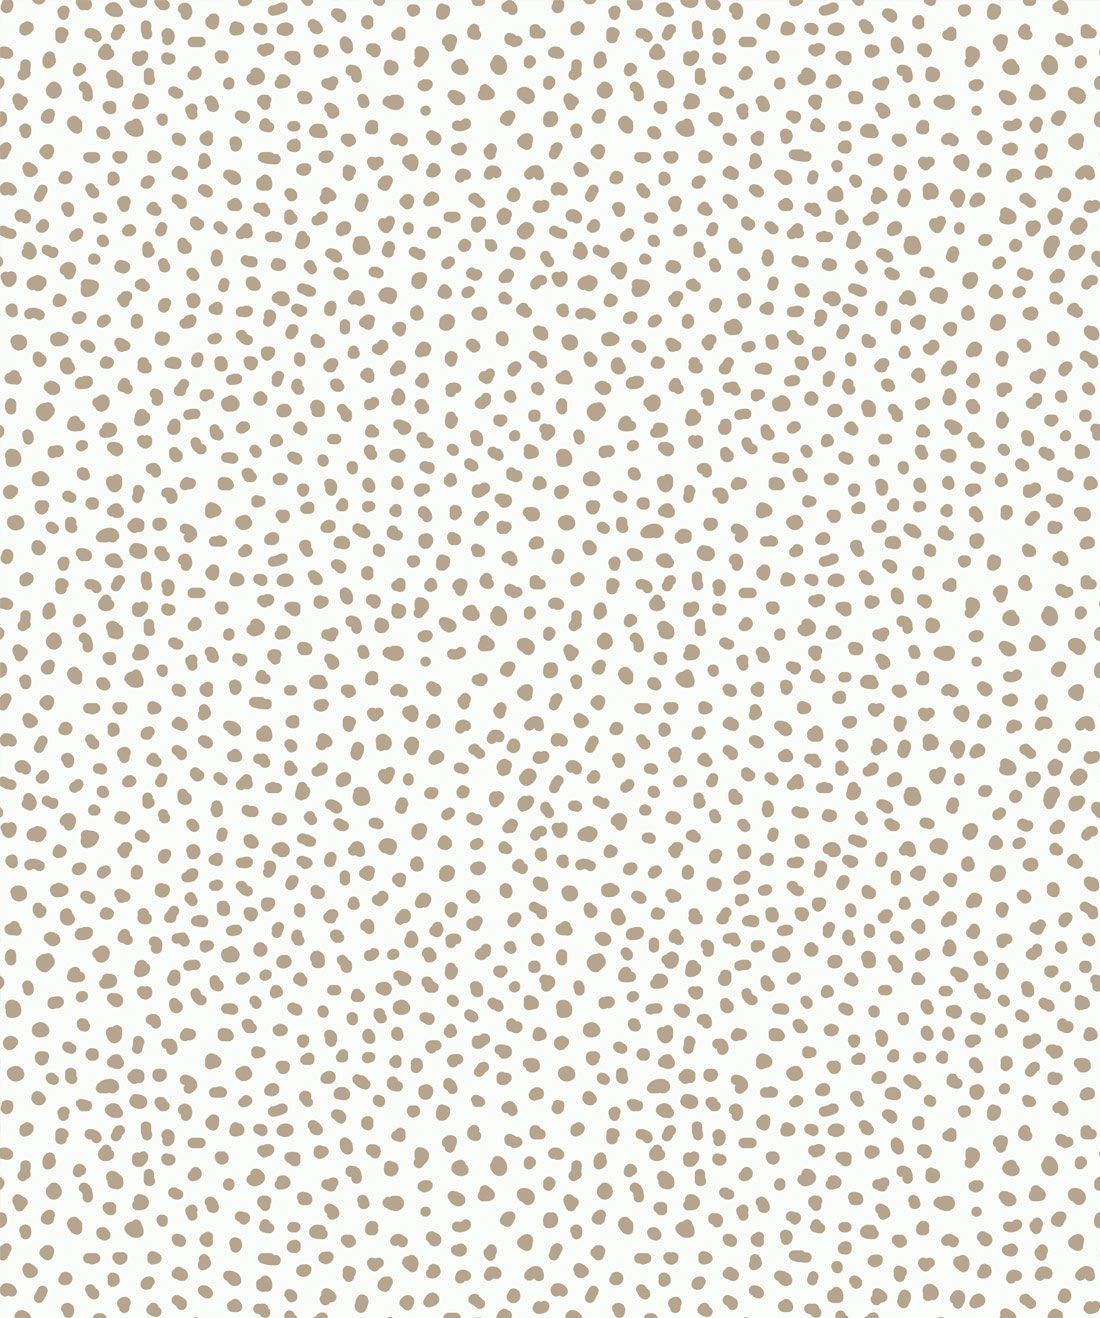 Huddy's Dots Taupe